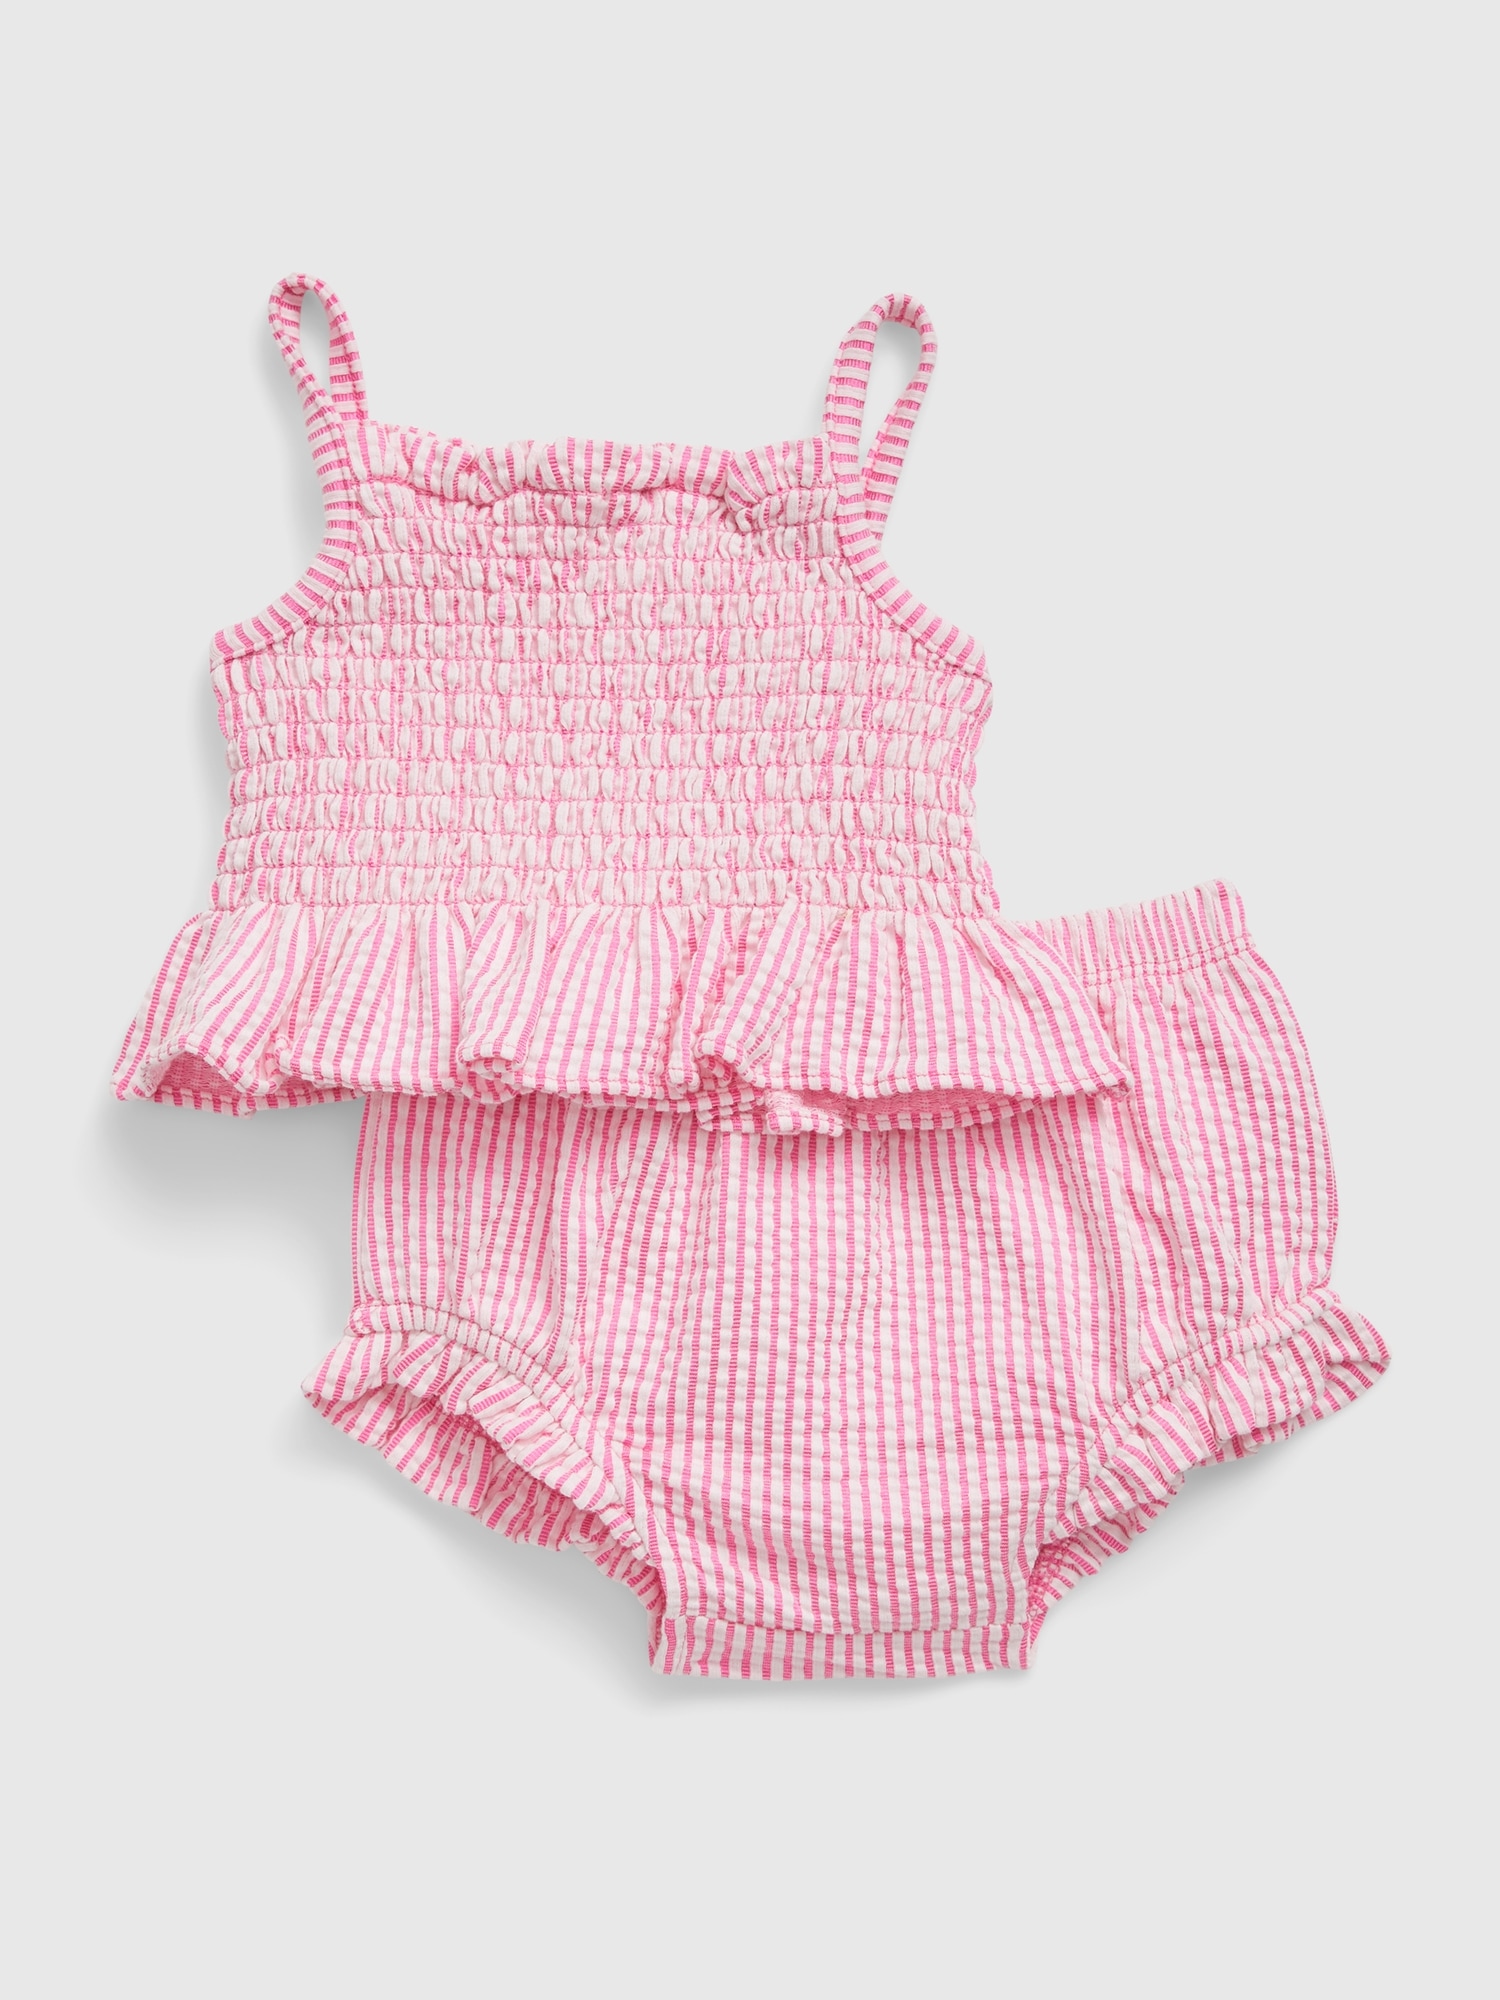 Gap Baby Smocked 2-Piece Outfit Set pink. 1